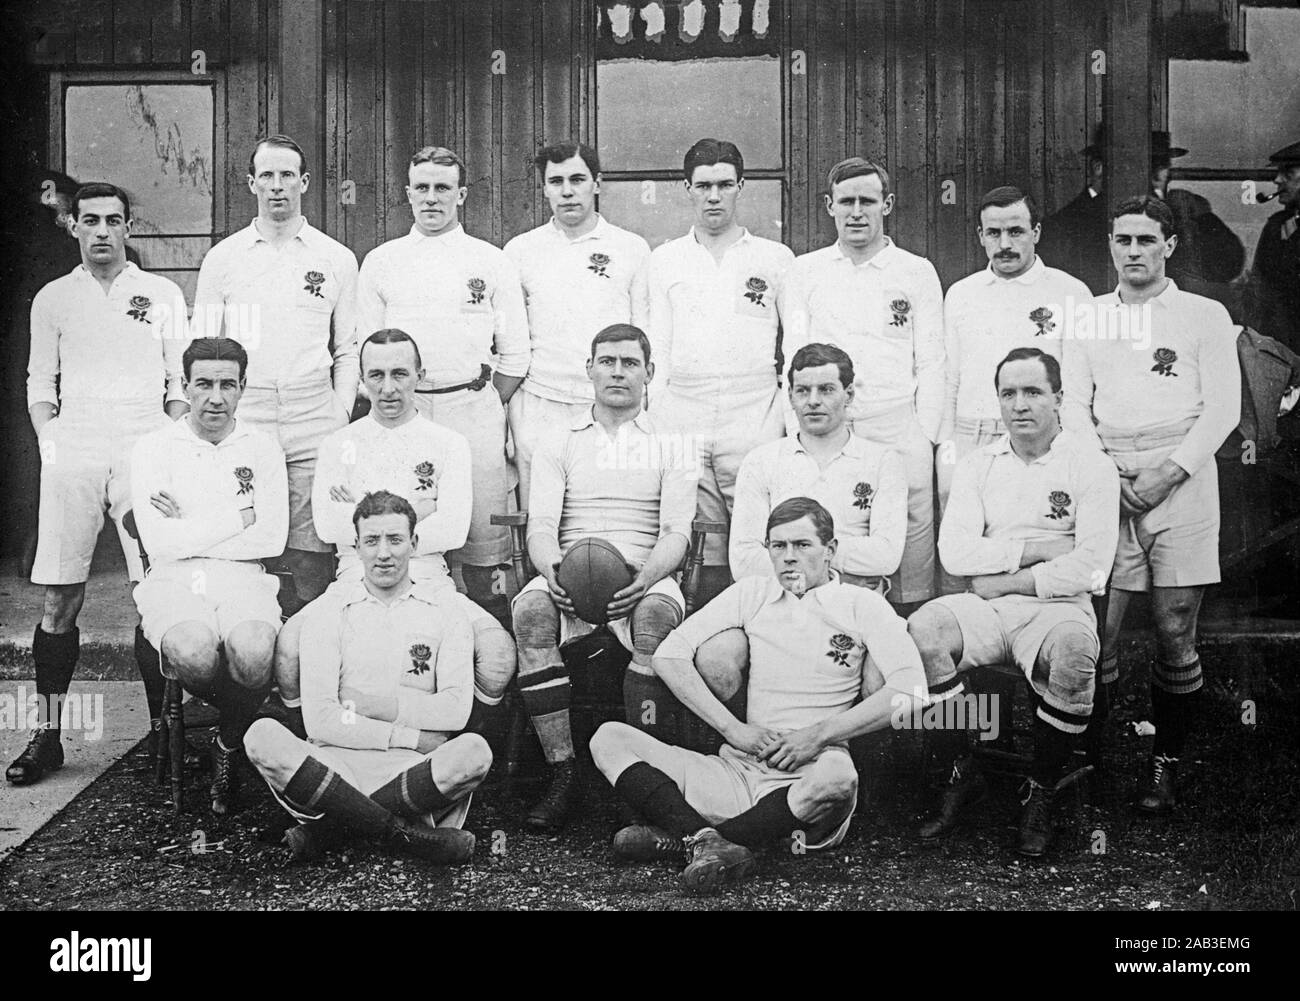 Vintage photograph of the The England Rugby Union Team in 1909 for their game against Ireland. The players were: John Jackett (Leicester), Edgar Mobbs (Northampton), Cyril Wright (Cambridge University), Ronnie Poulton-Palmer (Oxford University), AC Palmer (London H.), F Hutchinson (Headingley) HJH Sibree (Harlequins), HJS Morton (Cambridge University), Robert Dibble (Bridgwater & Albion) capt., WA Johns (Gloucester), AL Kewney (Leicester), AJ Wilson (Camborne School of Mines), FG Handford (Manchester), H Archer (Guy's Hospital), ET Ibbitson (Headingley). England won the game 11-5. Stock Photo